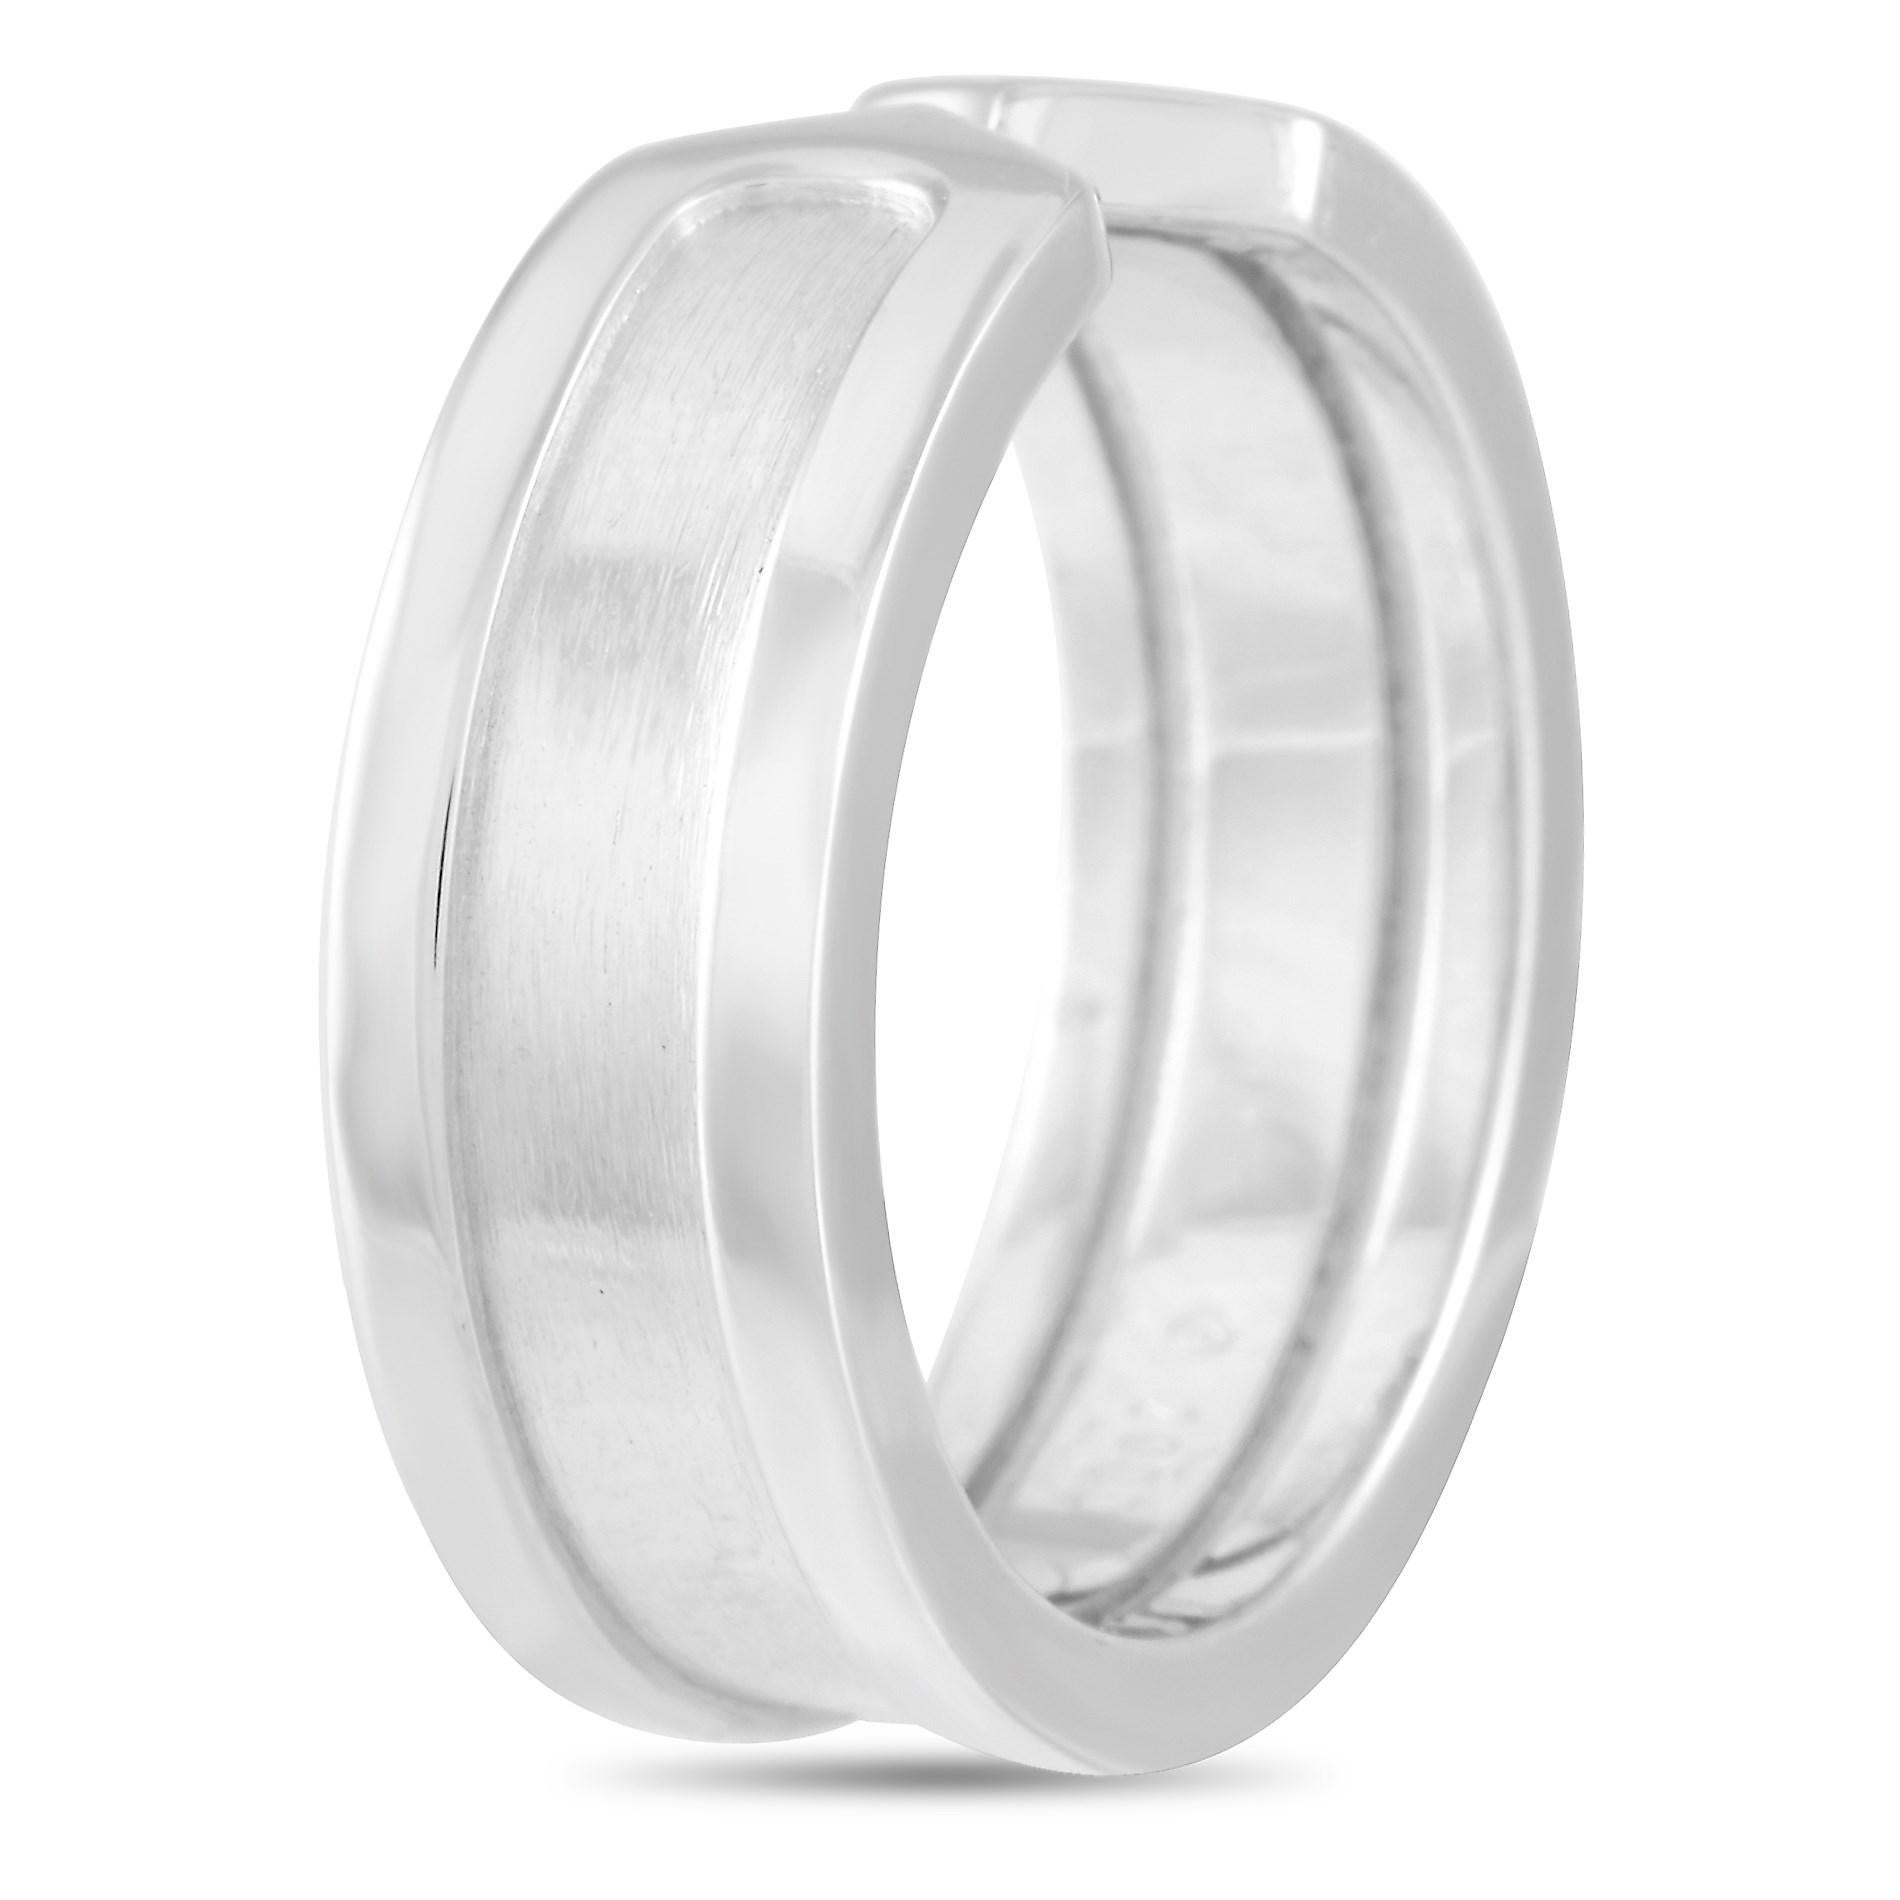 The Cartier 18K White Gold  Double C Ring is a classy ring with a simple yet timeless design. The double C logo is sculpted at the sides of each opening. The ring has a Cartier signature inside the shank. This is one Cartier classic that you will